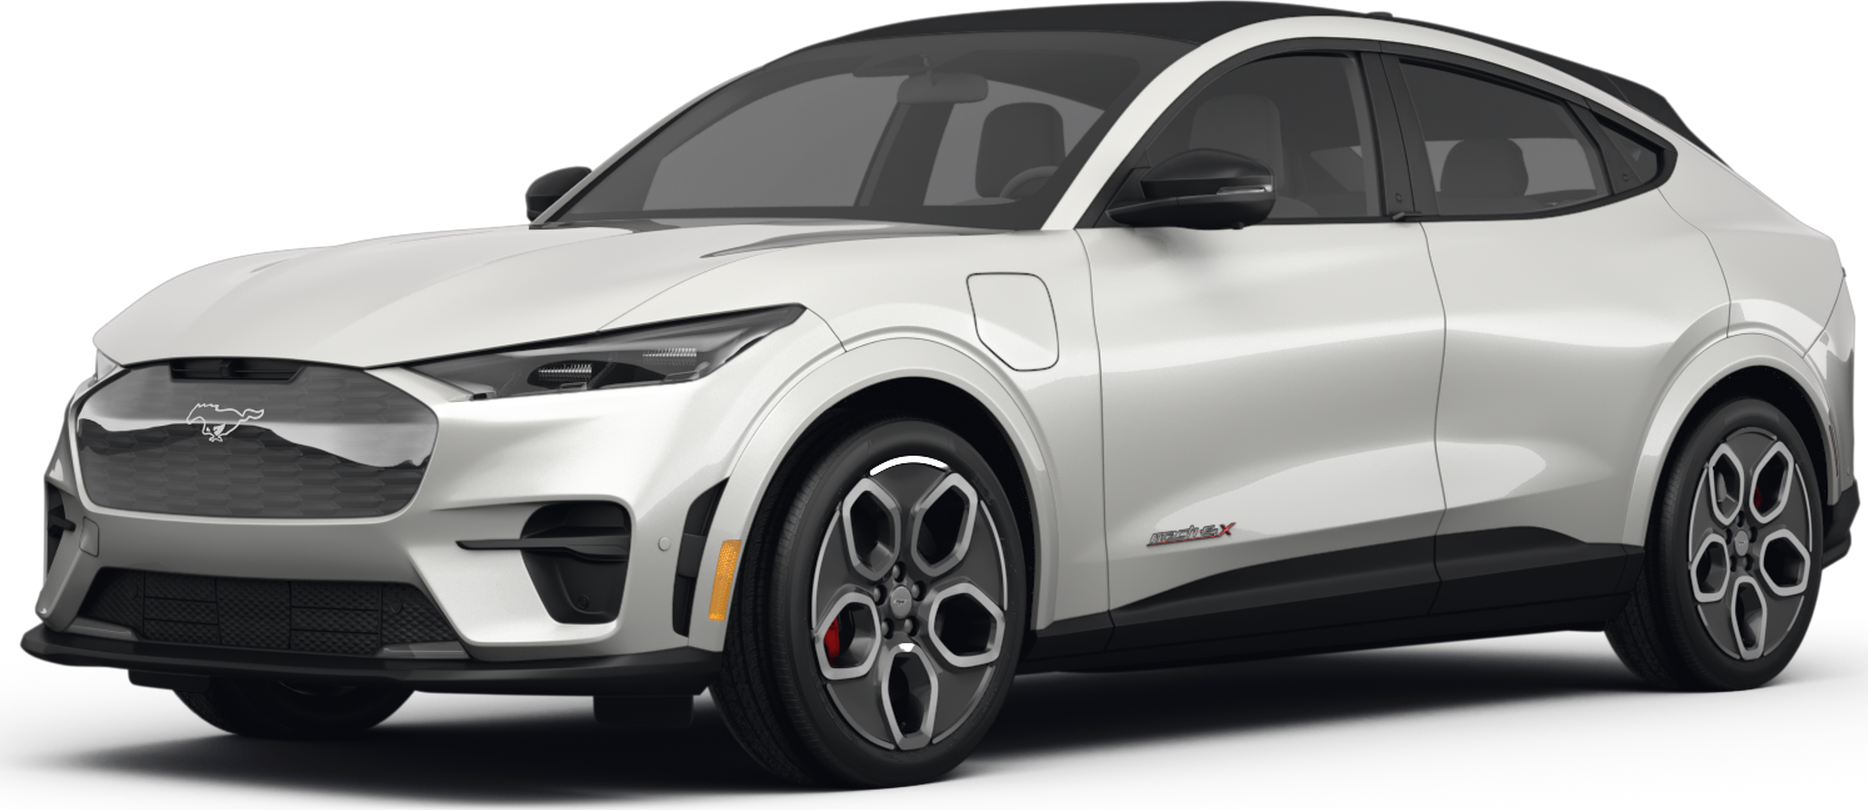 Ford Mustang Mach-E Review (2022): Comfortable Electric SUV